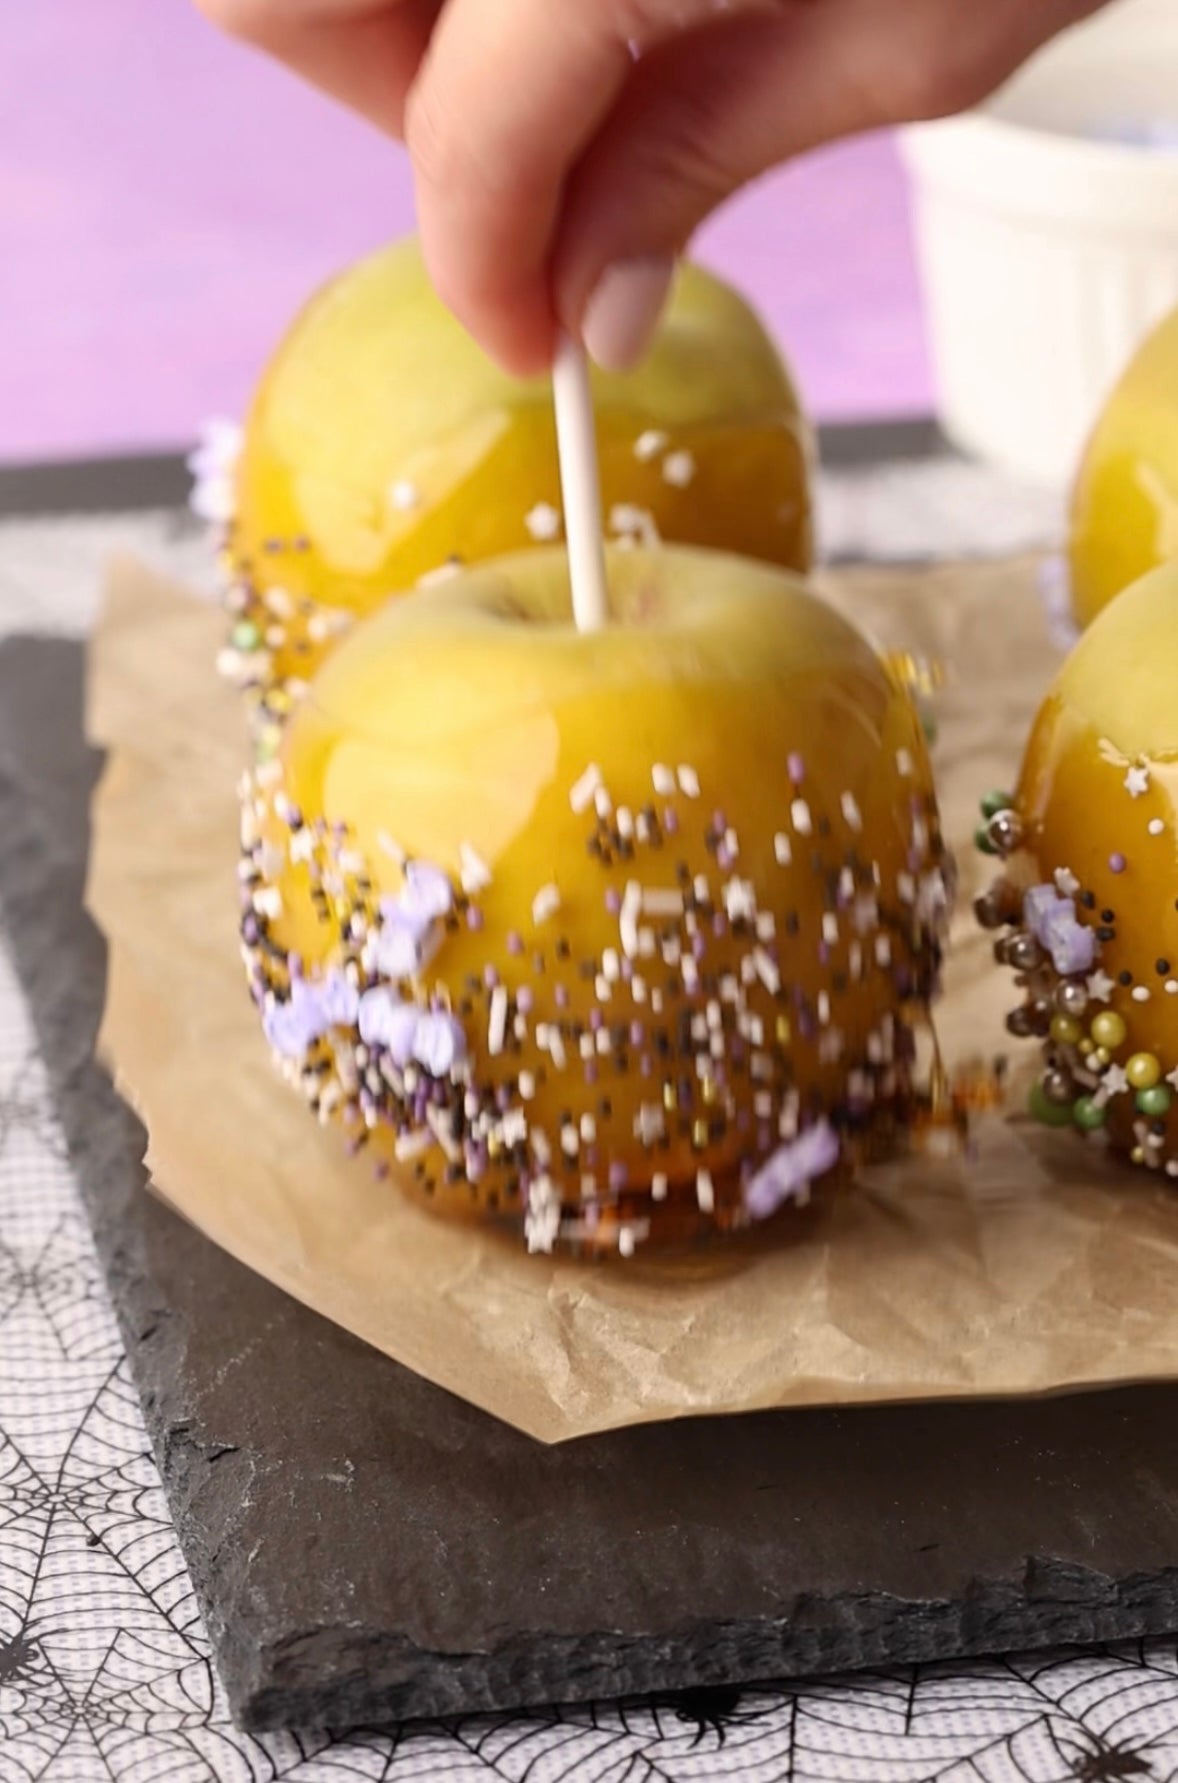 Candy apple recipe with caramel